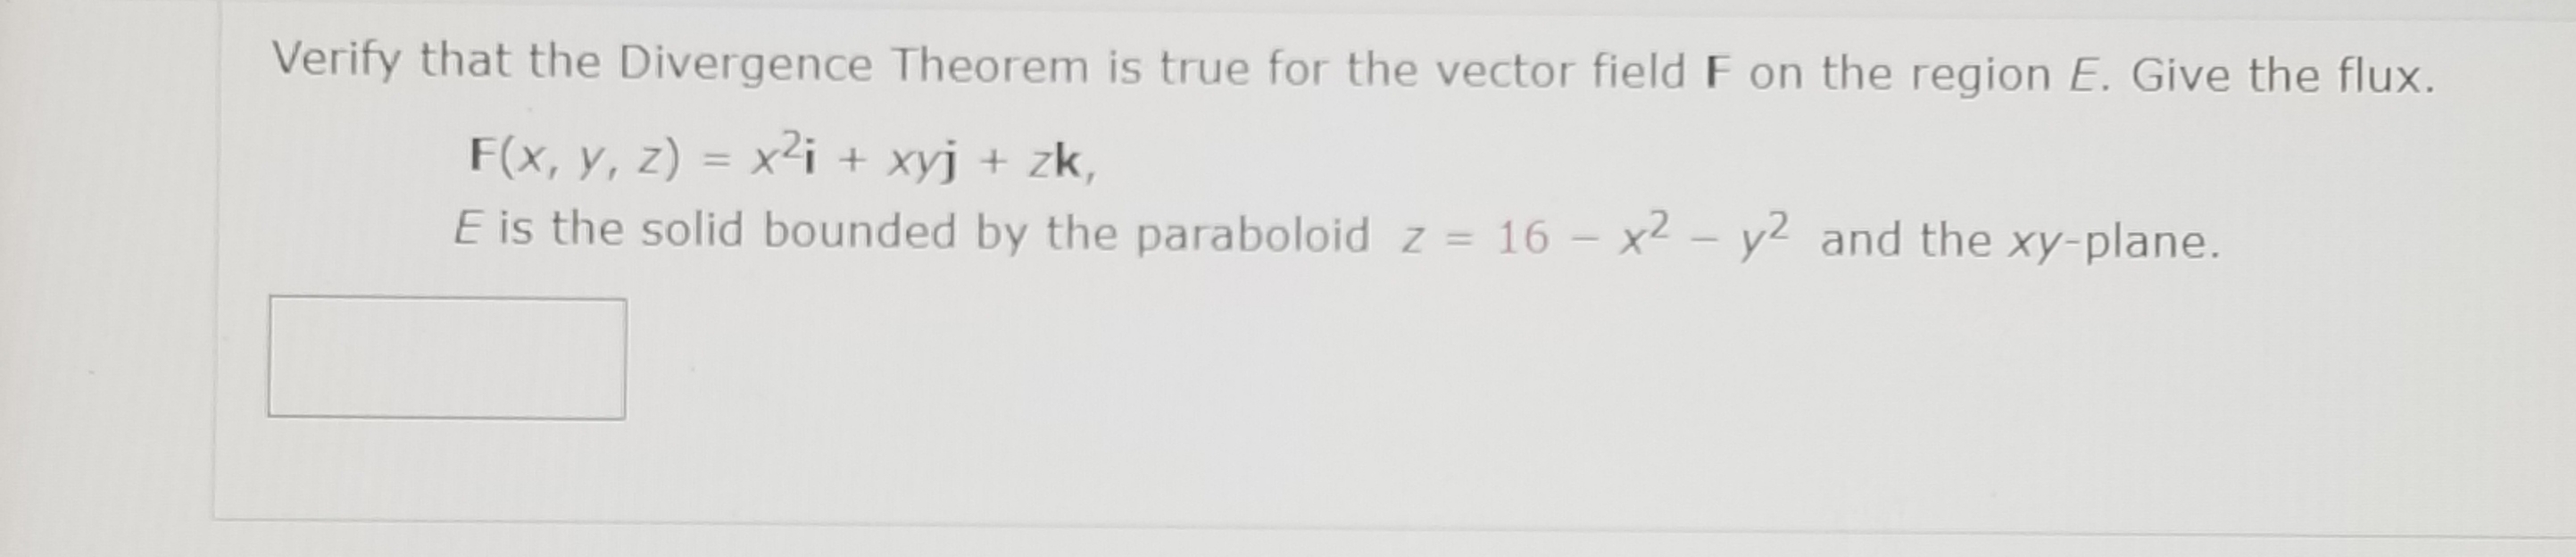 Verify that the Divergence Theorem is true for the vector field F on the region E. Give the flux.
F(x, y, z) = x²i + xyj + zk,
E is the solid bounded by the paraboloid z = 16 – x2 – y2 and the xy-plane.
%3D
